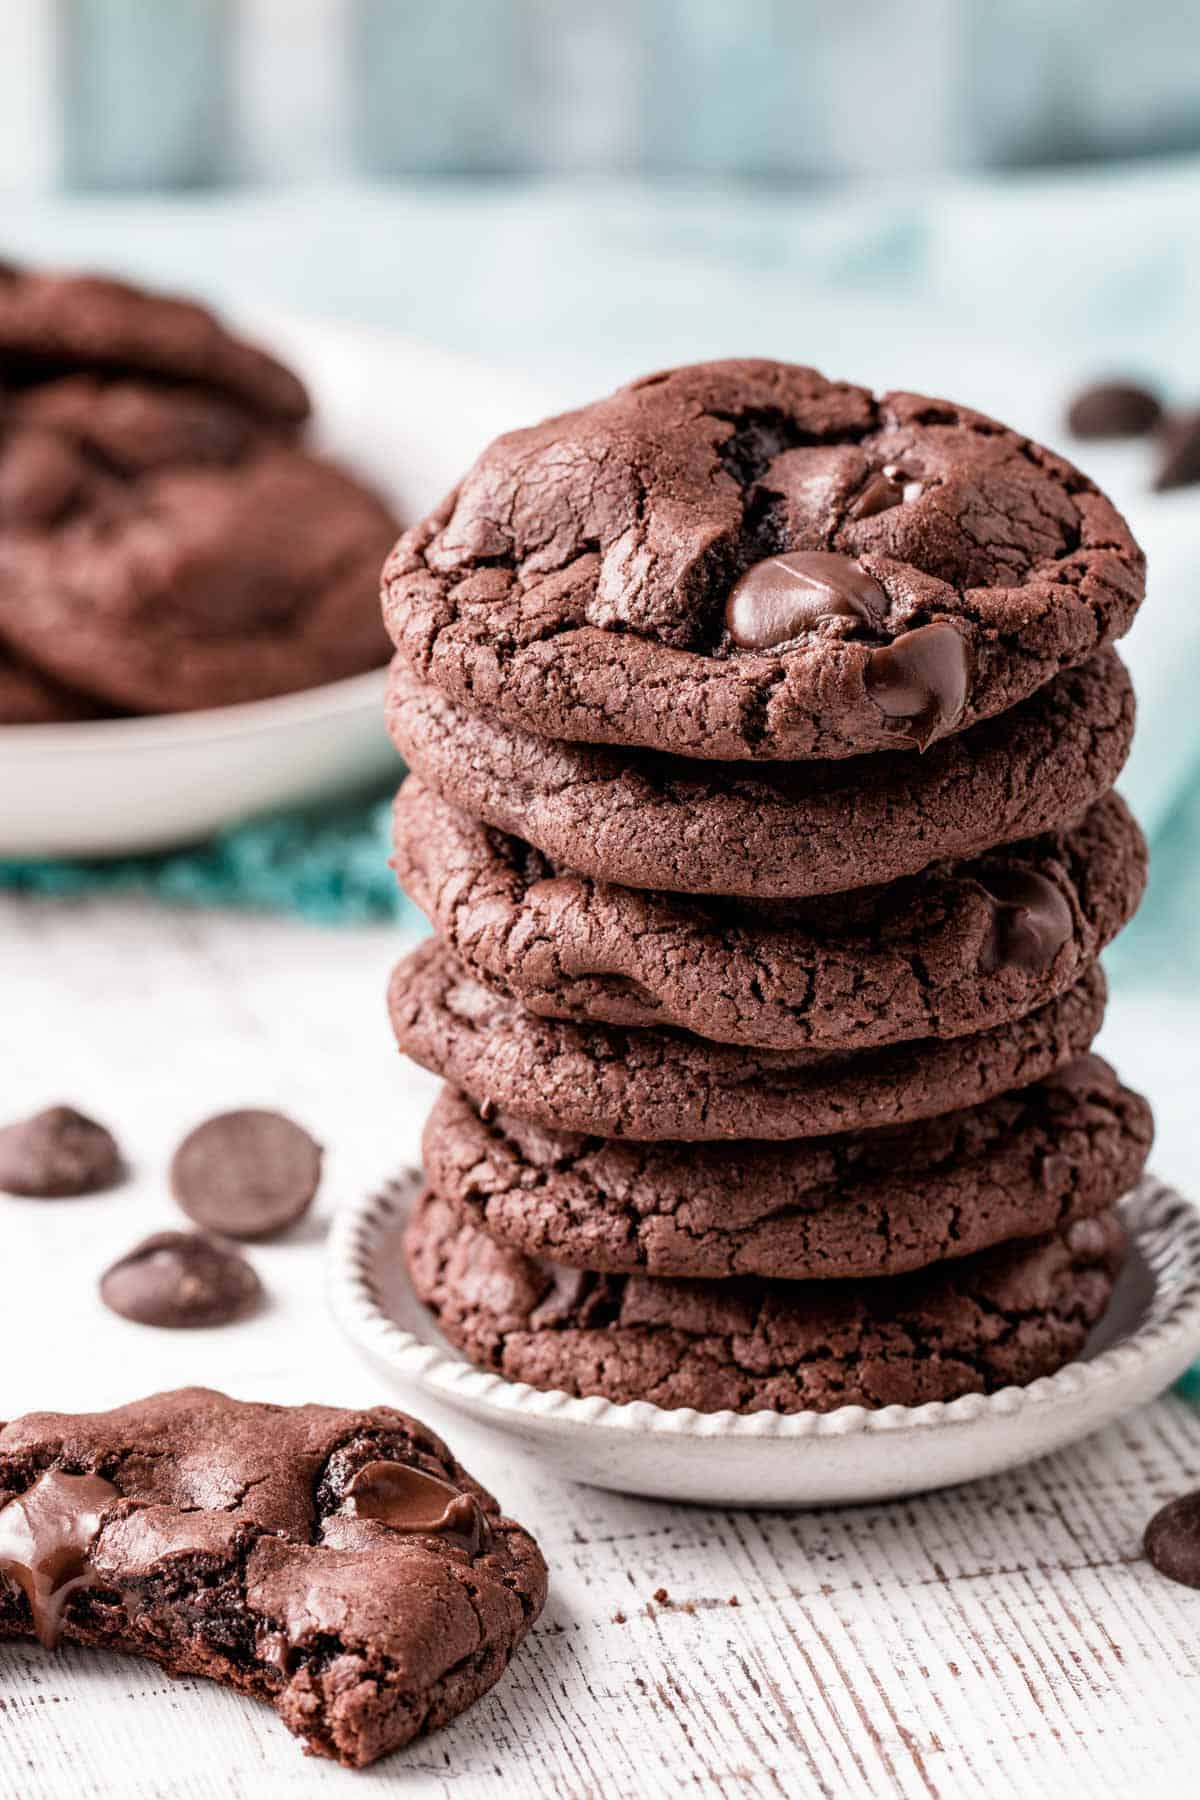 A stack of chocolate cookies with a half eaten cookie next to it.